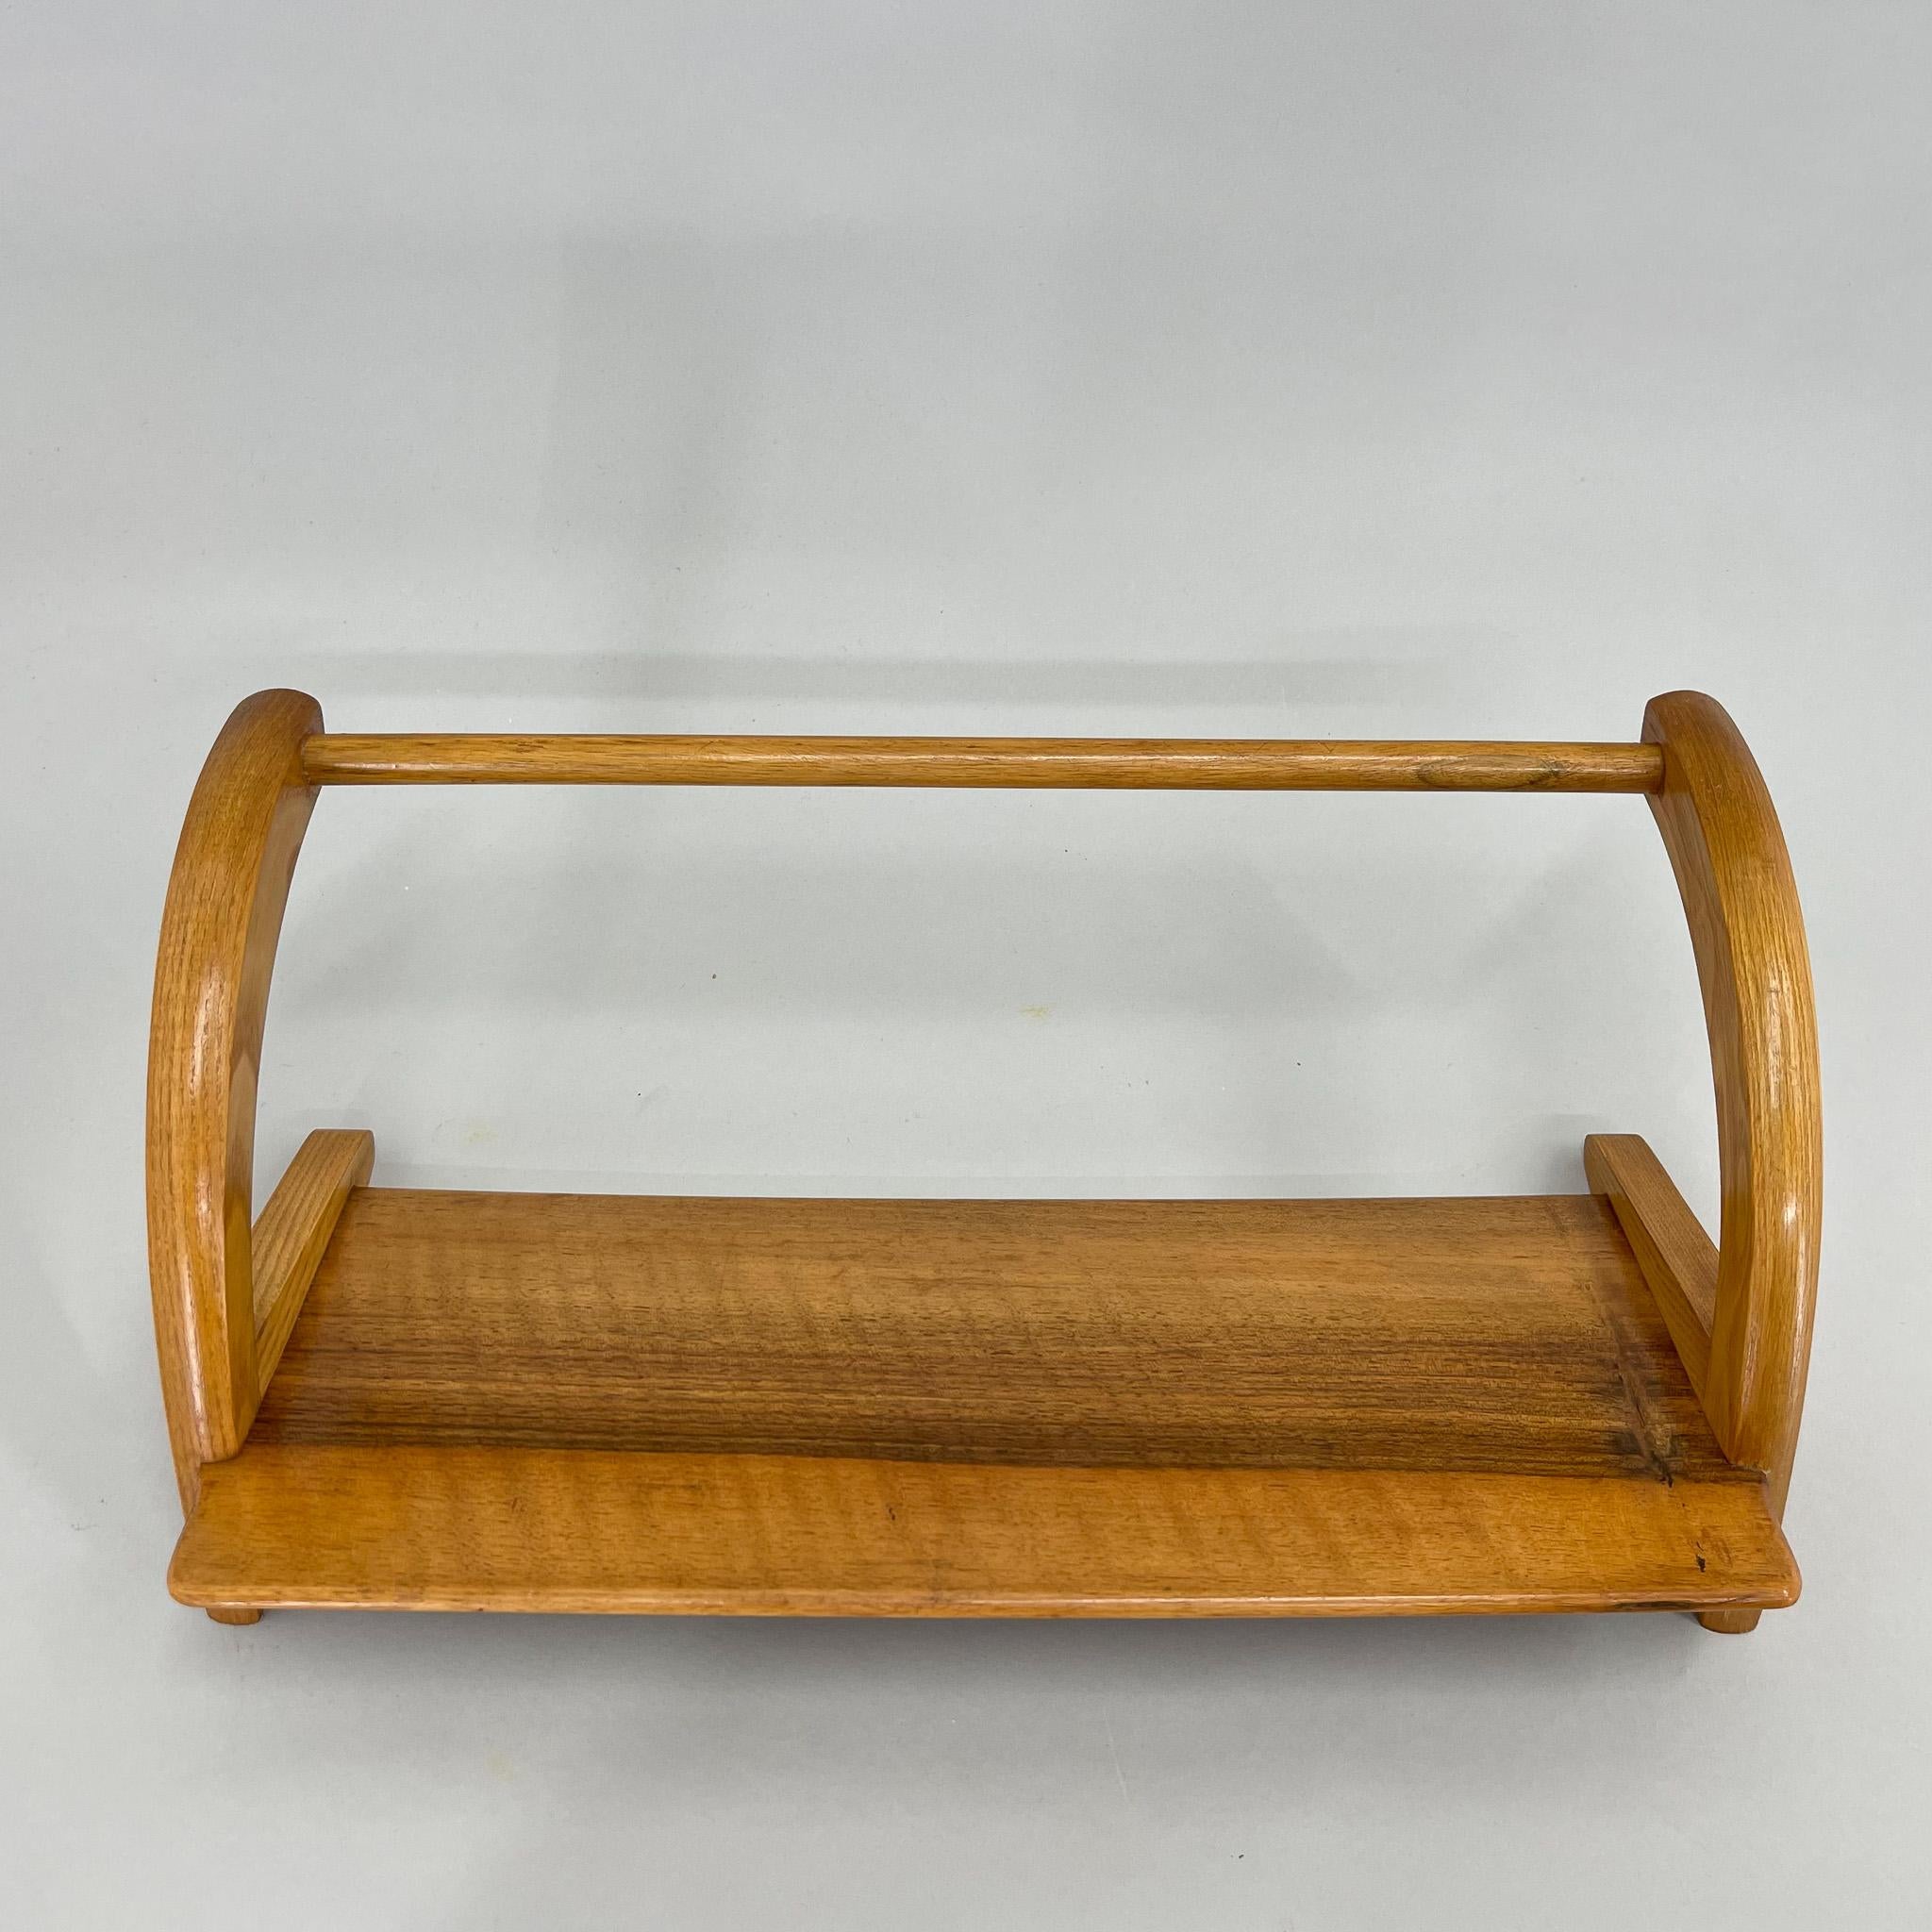 Wood 1970's Unique Book Stand Shelf by ULUV, Czechoslovakia For Sale